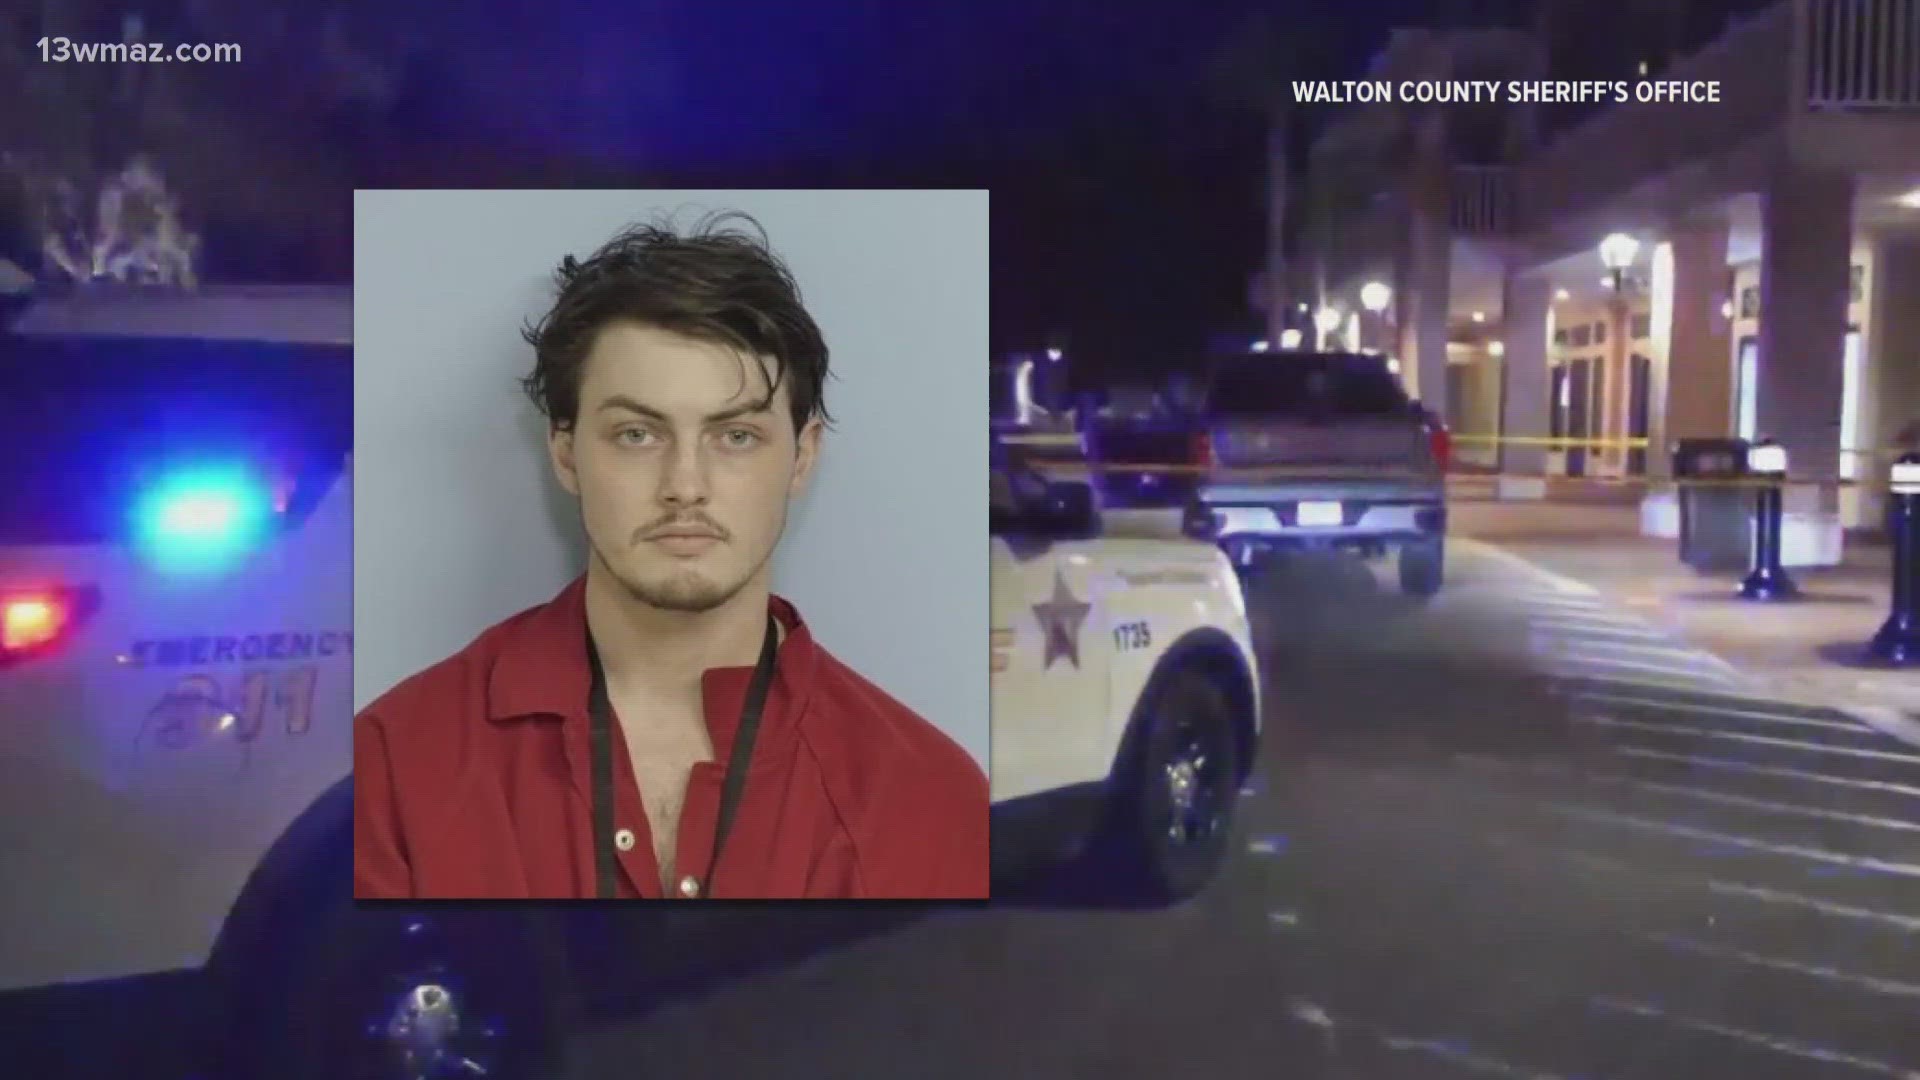 According to investigators, first-degree premeditated murder is a capital felony in Florida.